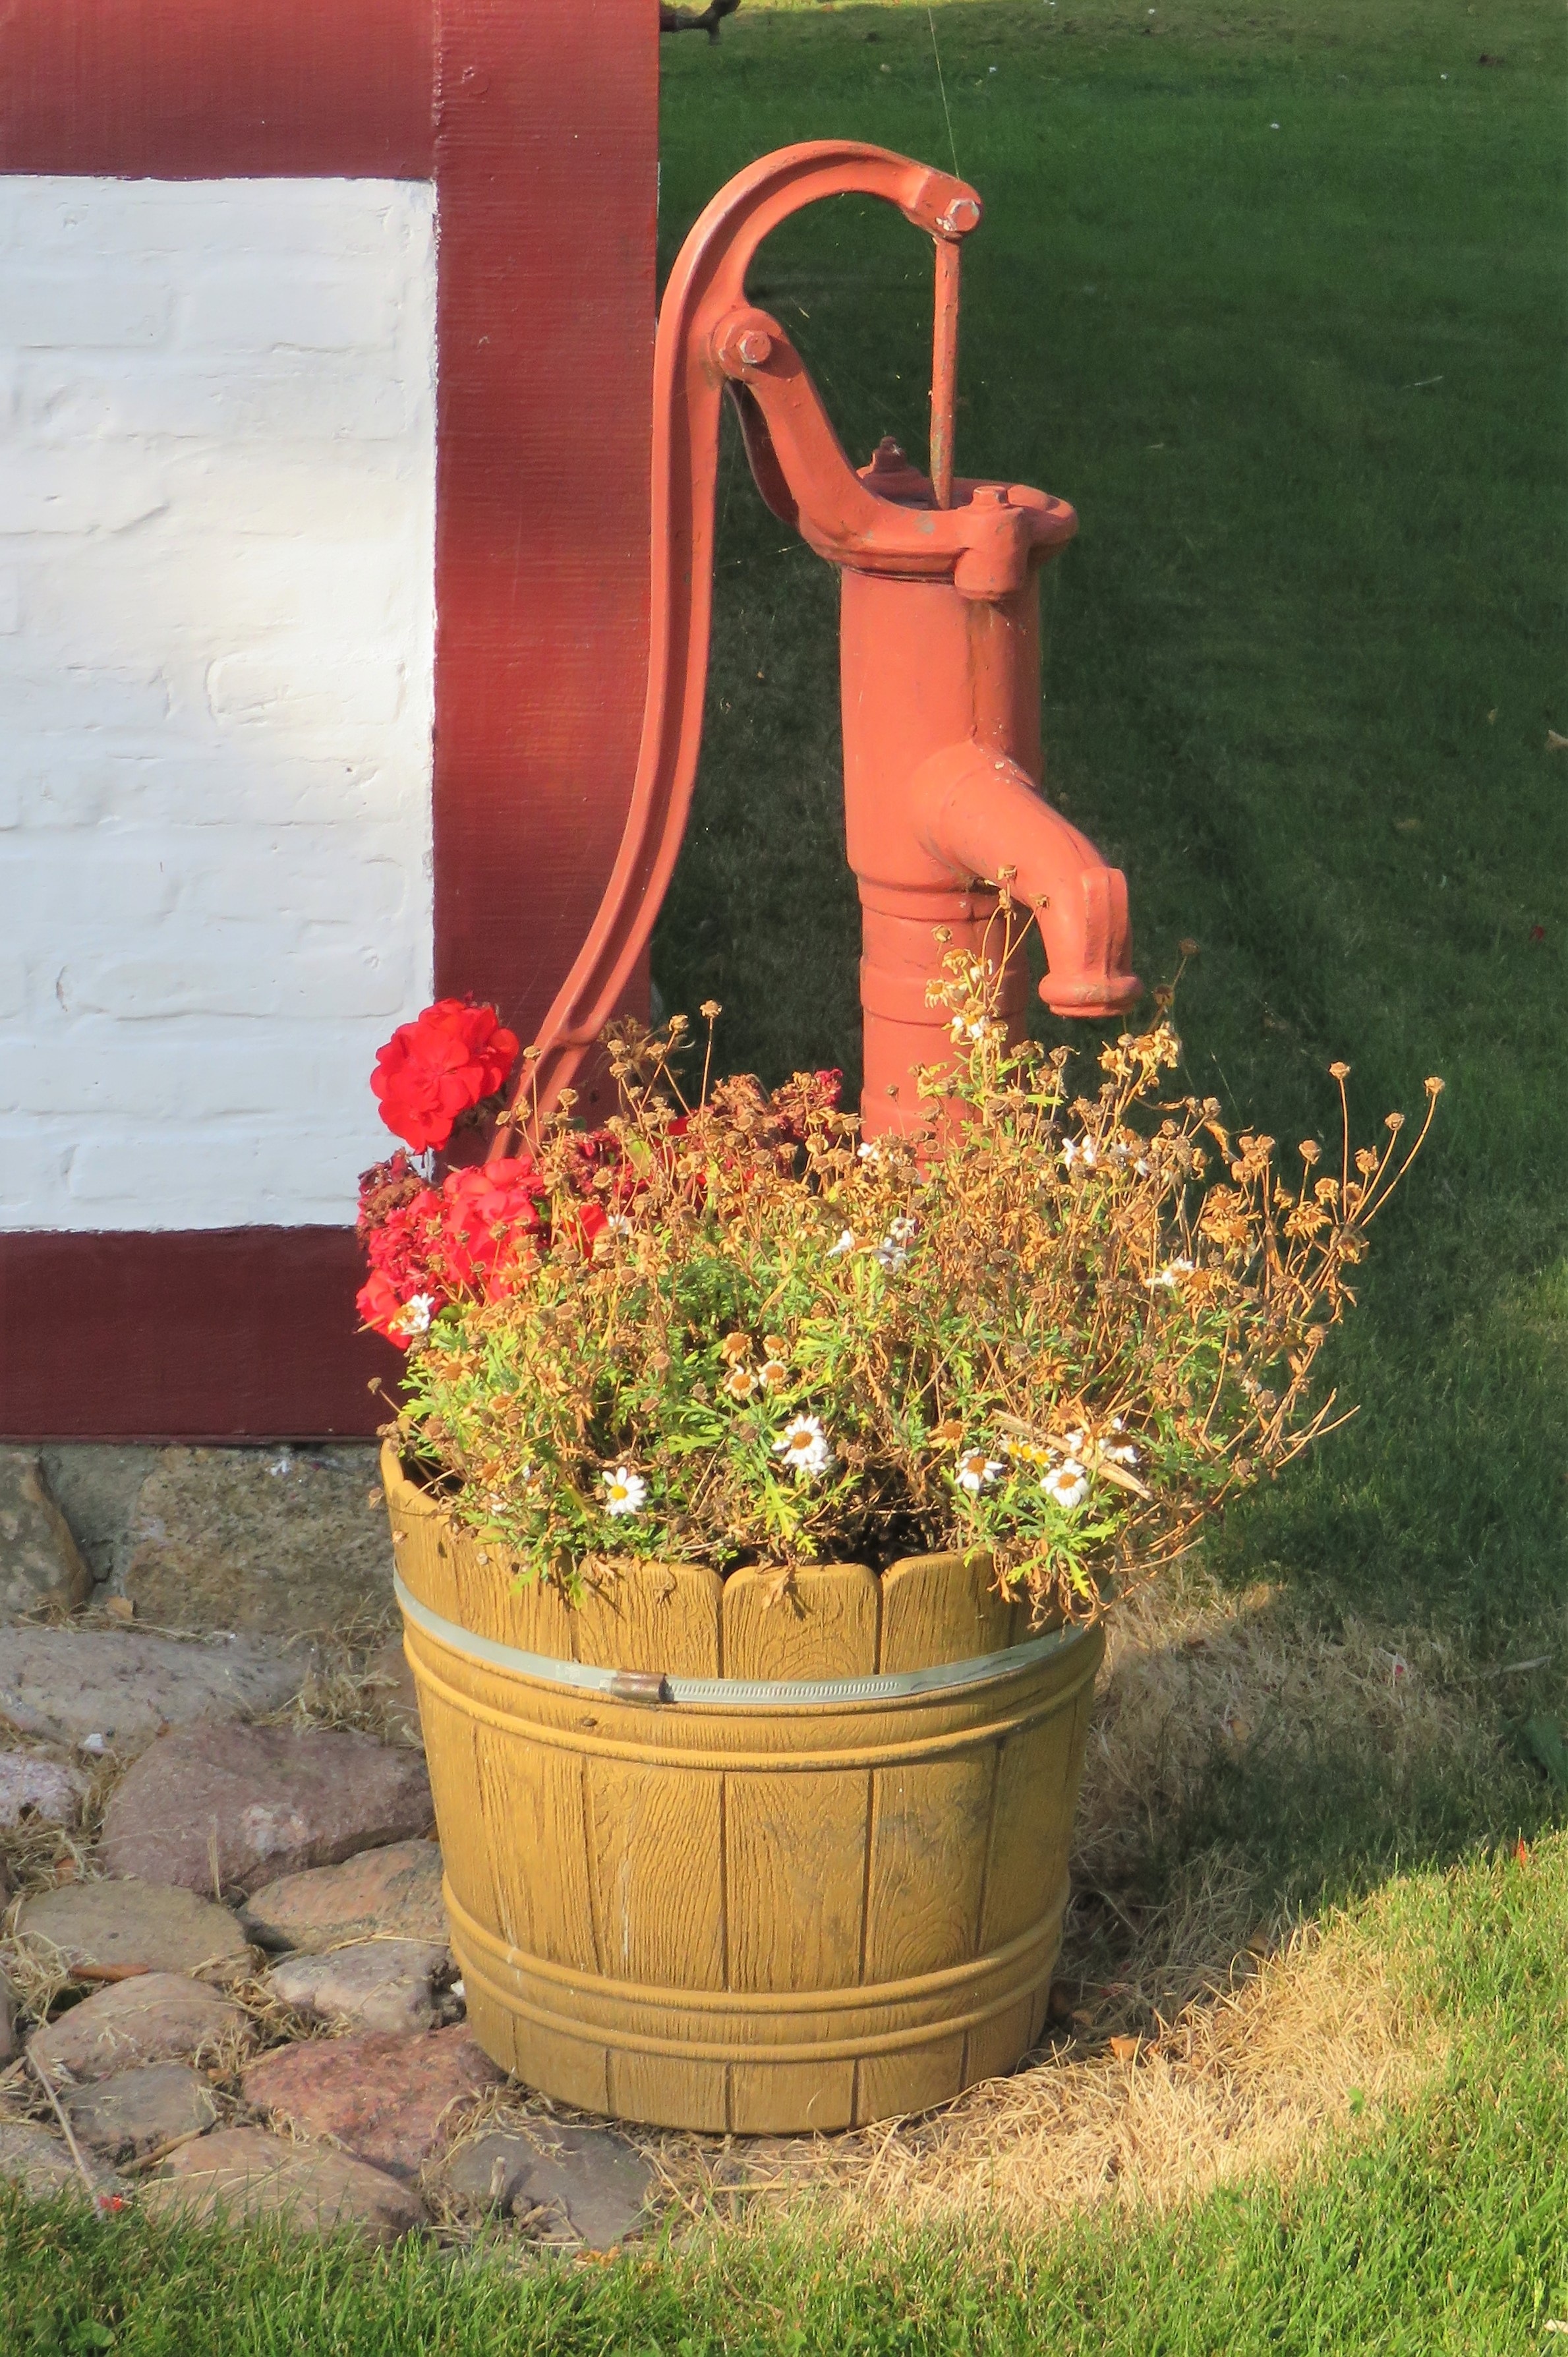 brown wooden pot and red steel water pump